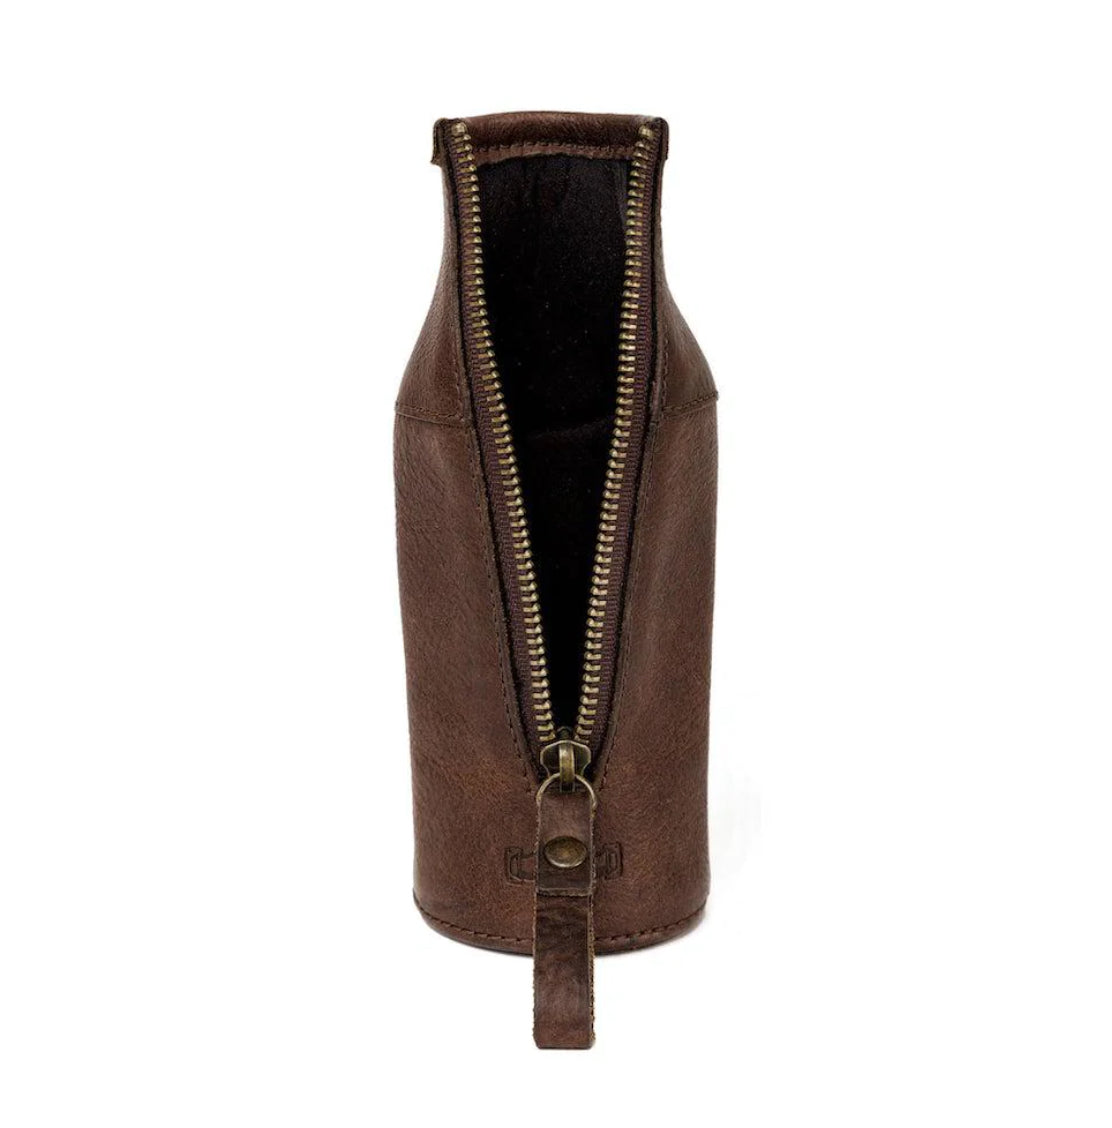 Campaign Leather Bottle Koozie